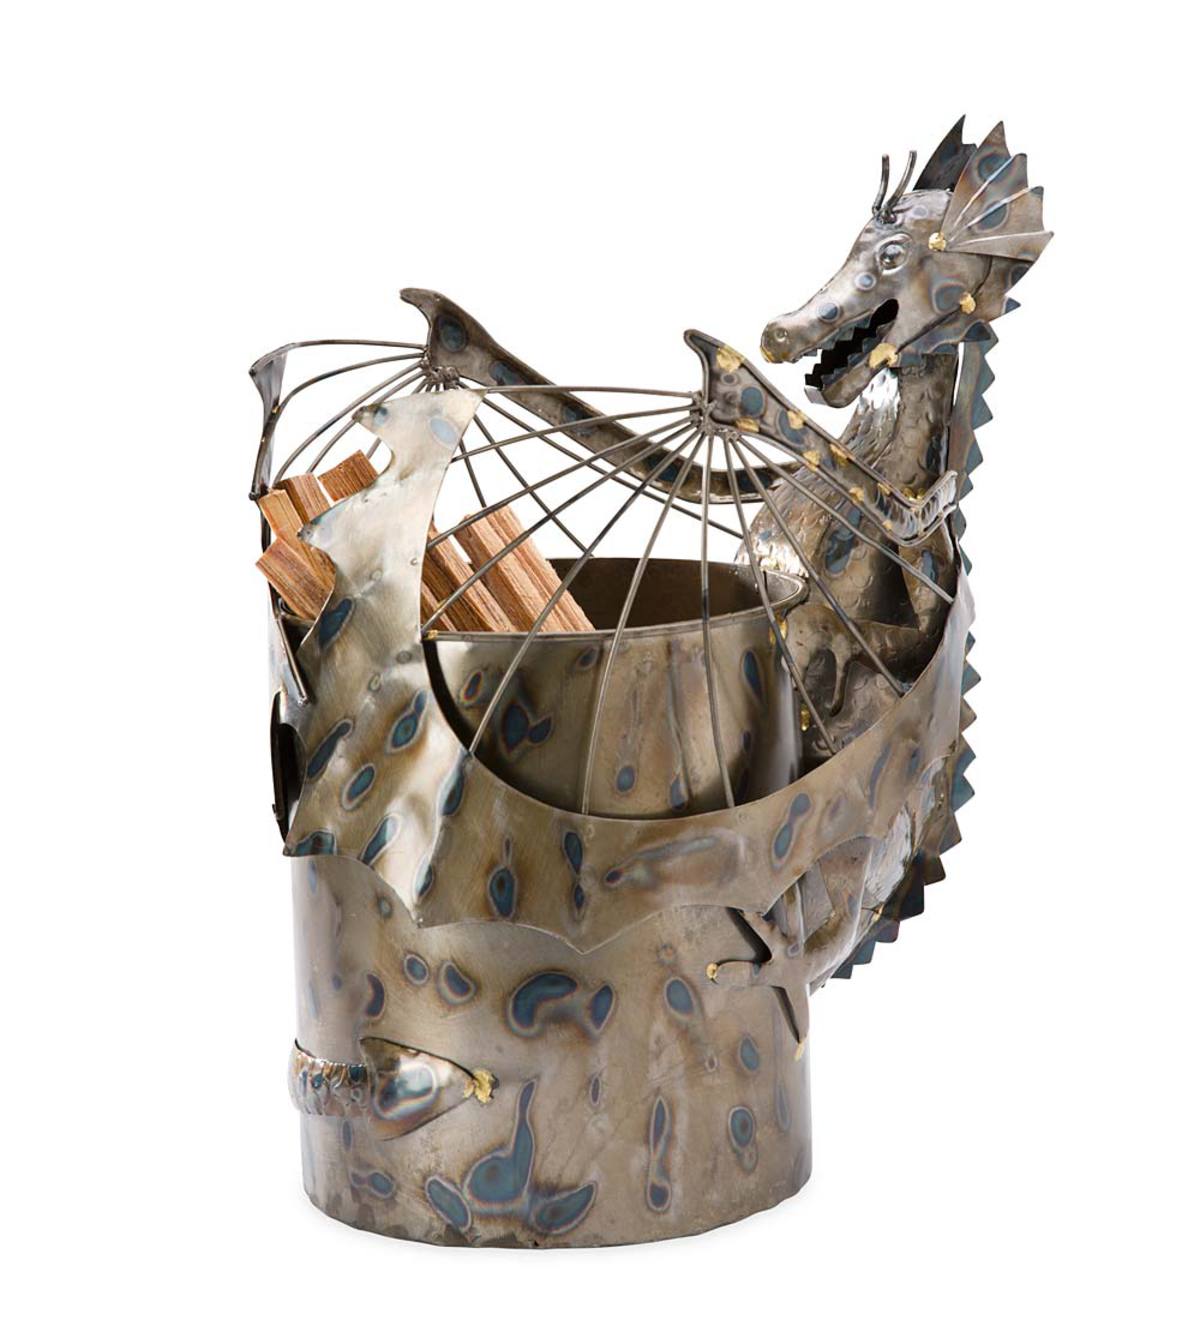 Metal Dragon Fatwood Holder with 5 lbs. of Fatwood - Silver